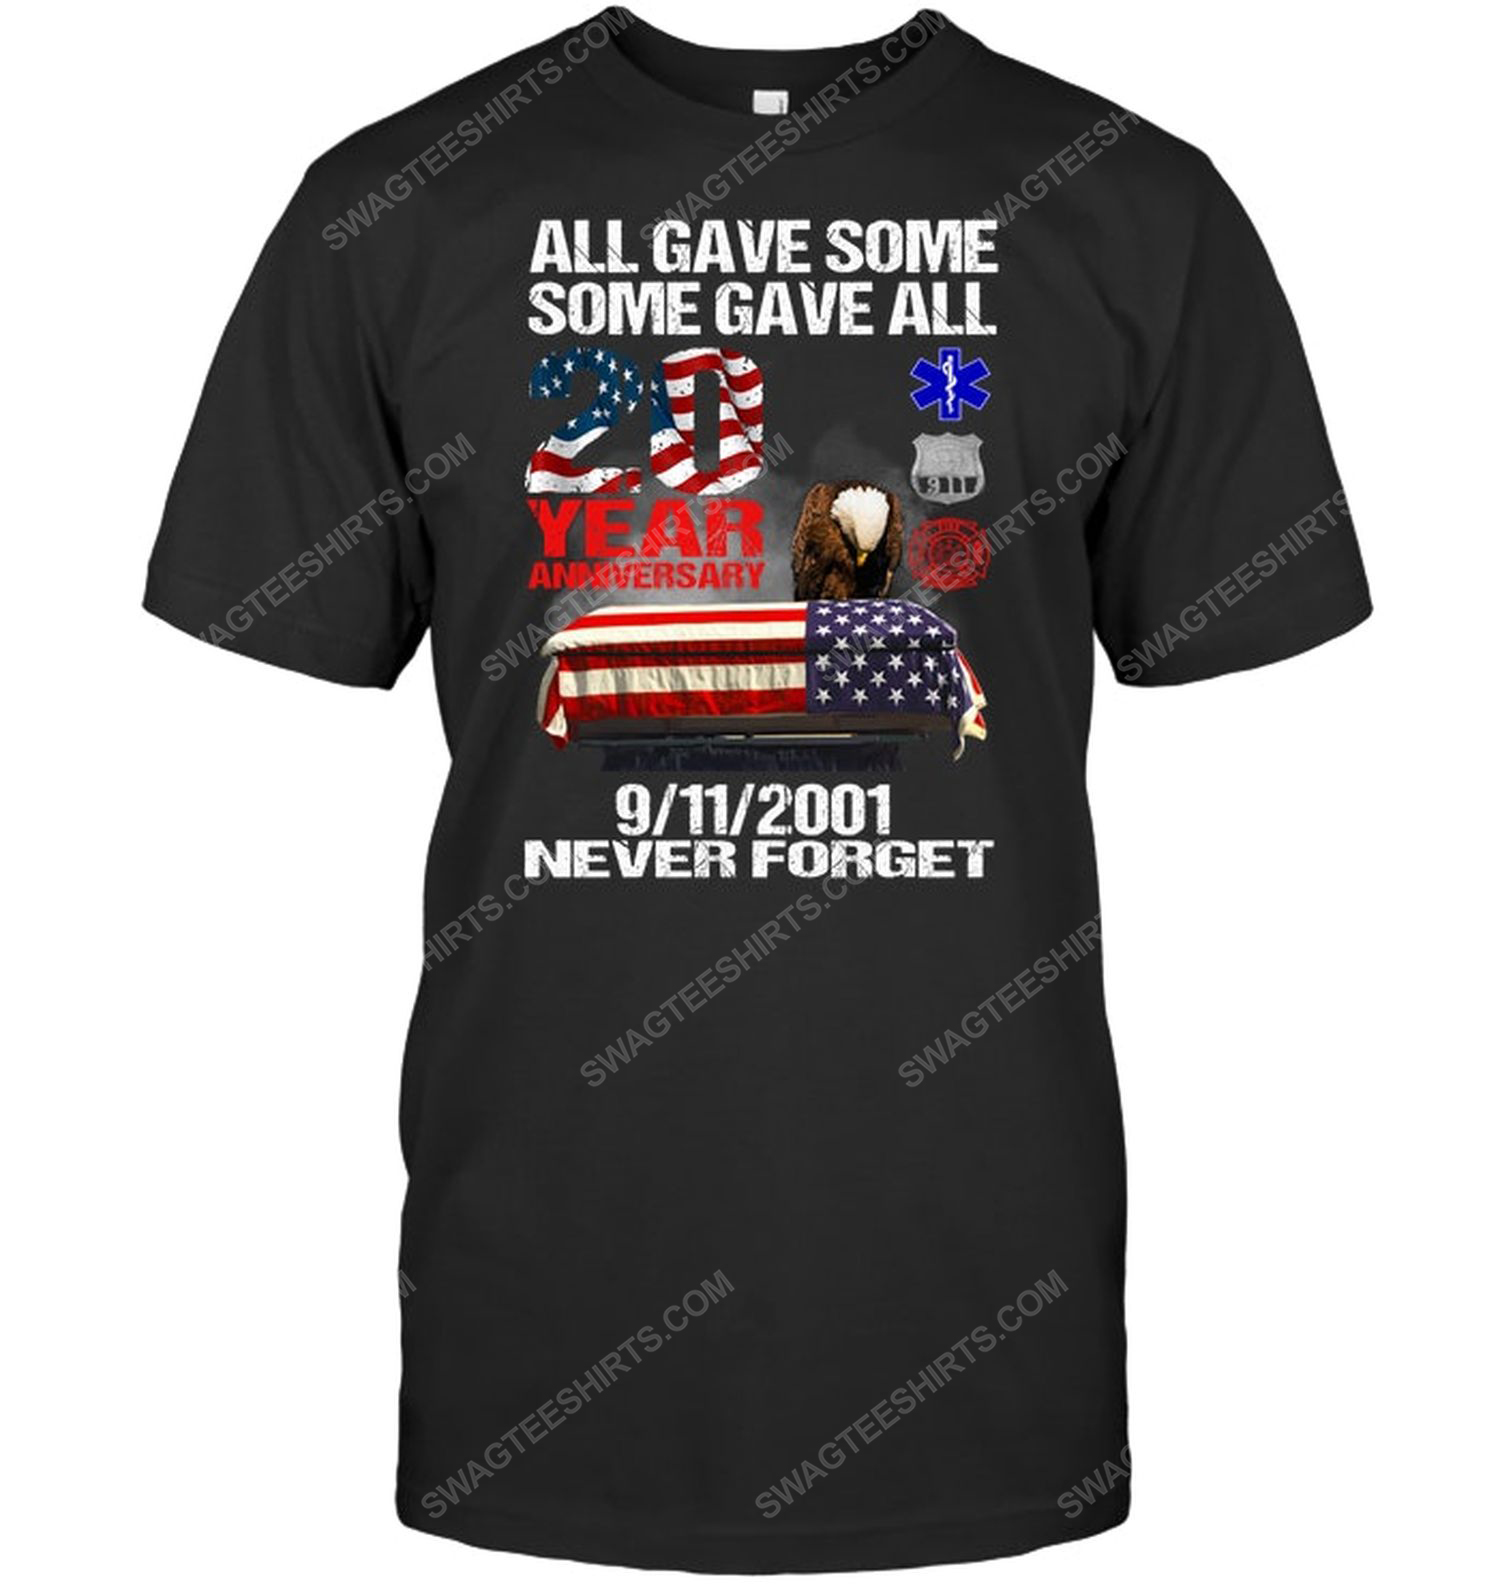 All gave some some gave all 20 year anniversary 9 2001 never forget political tshirt